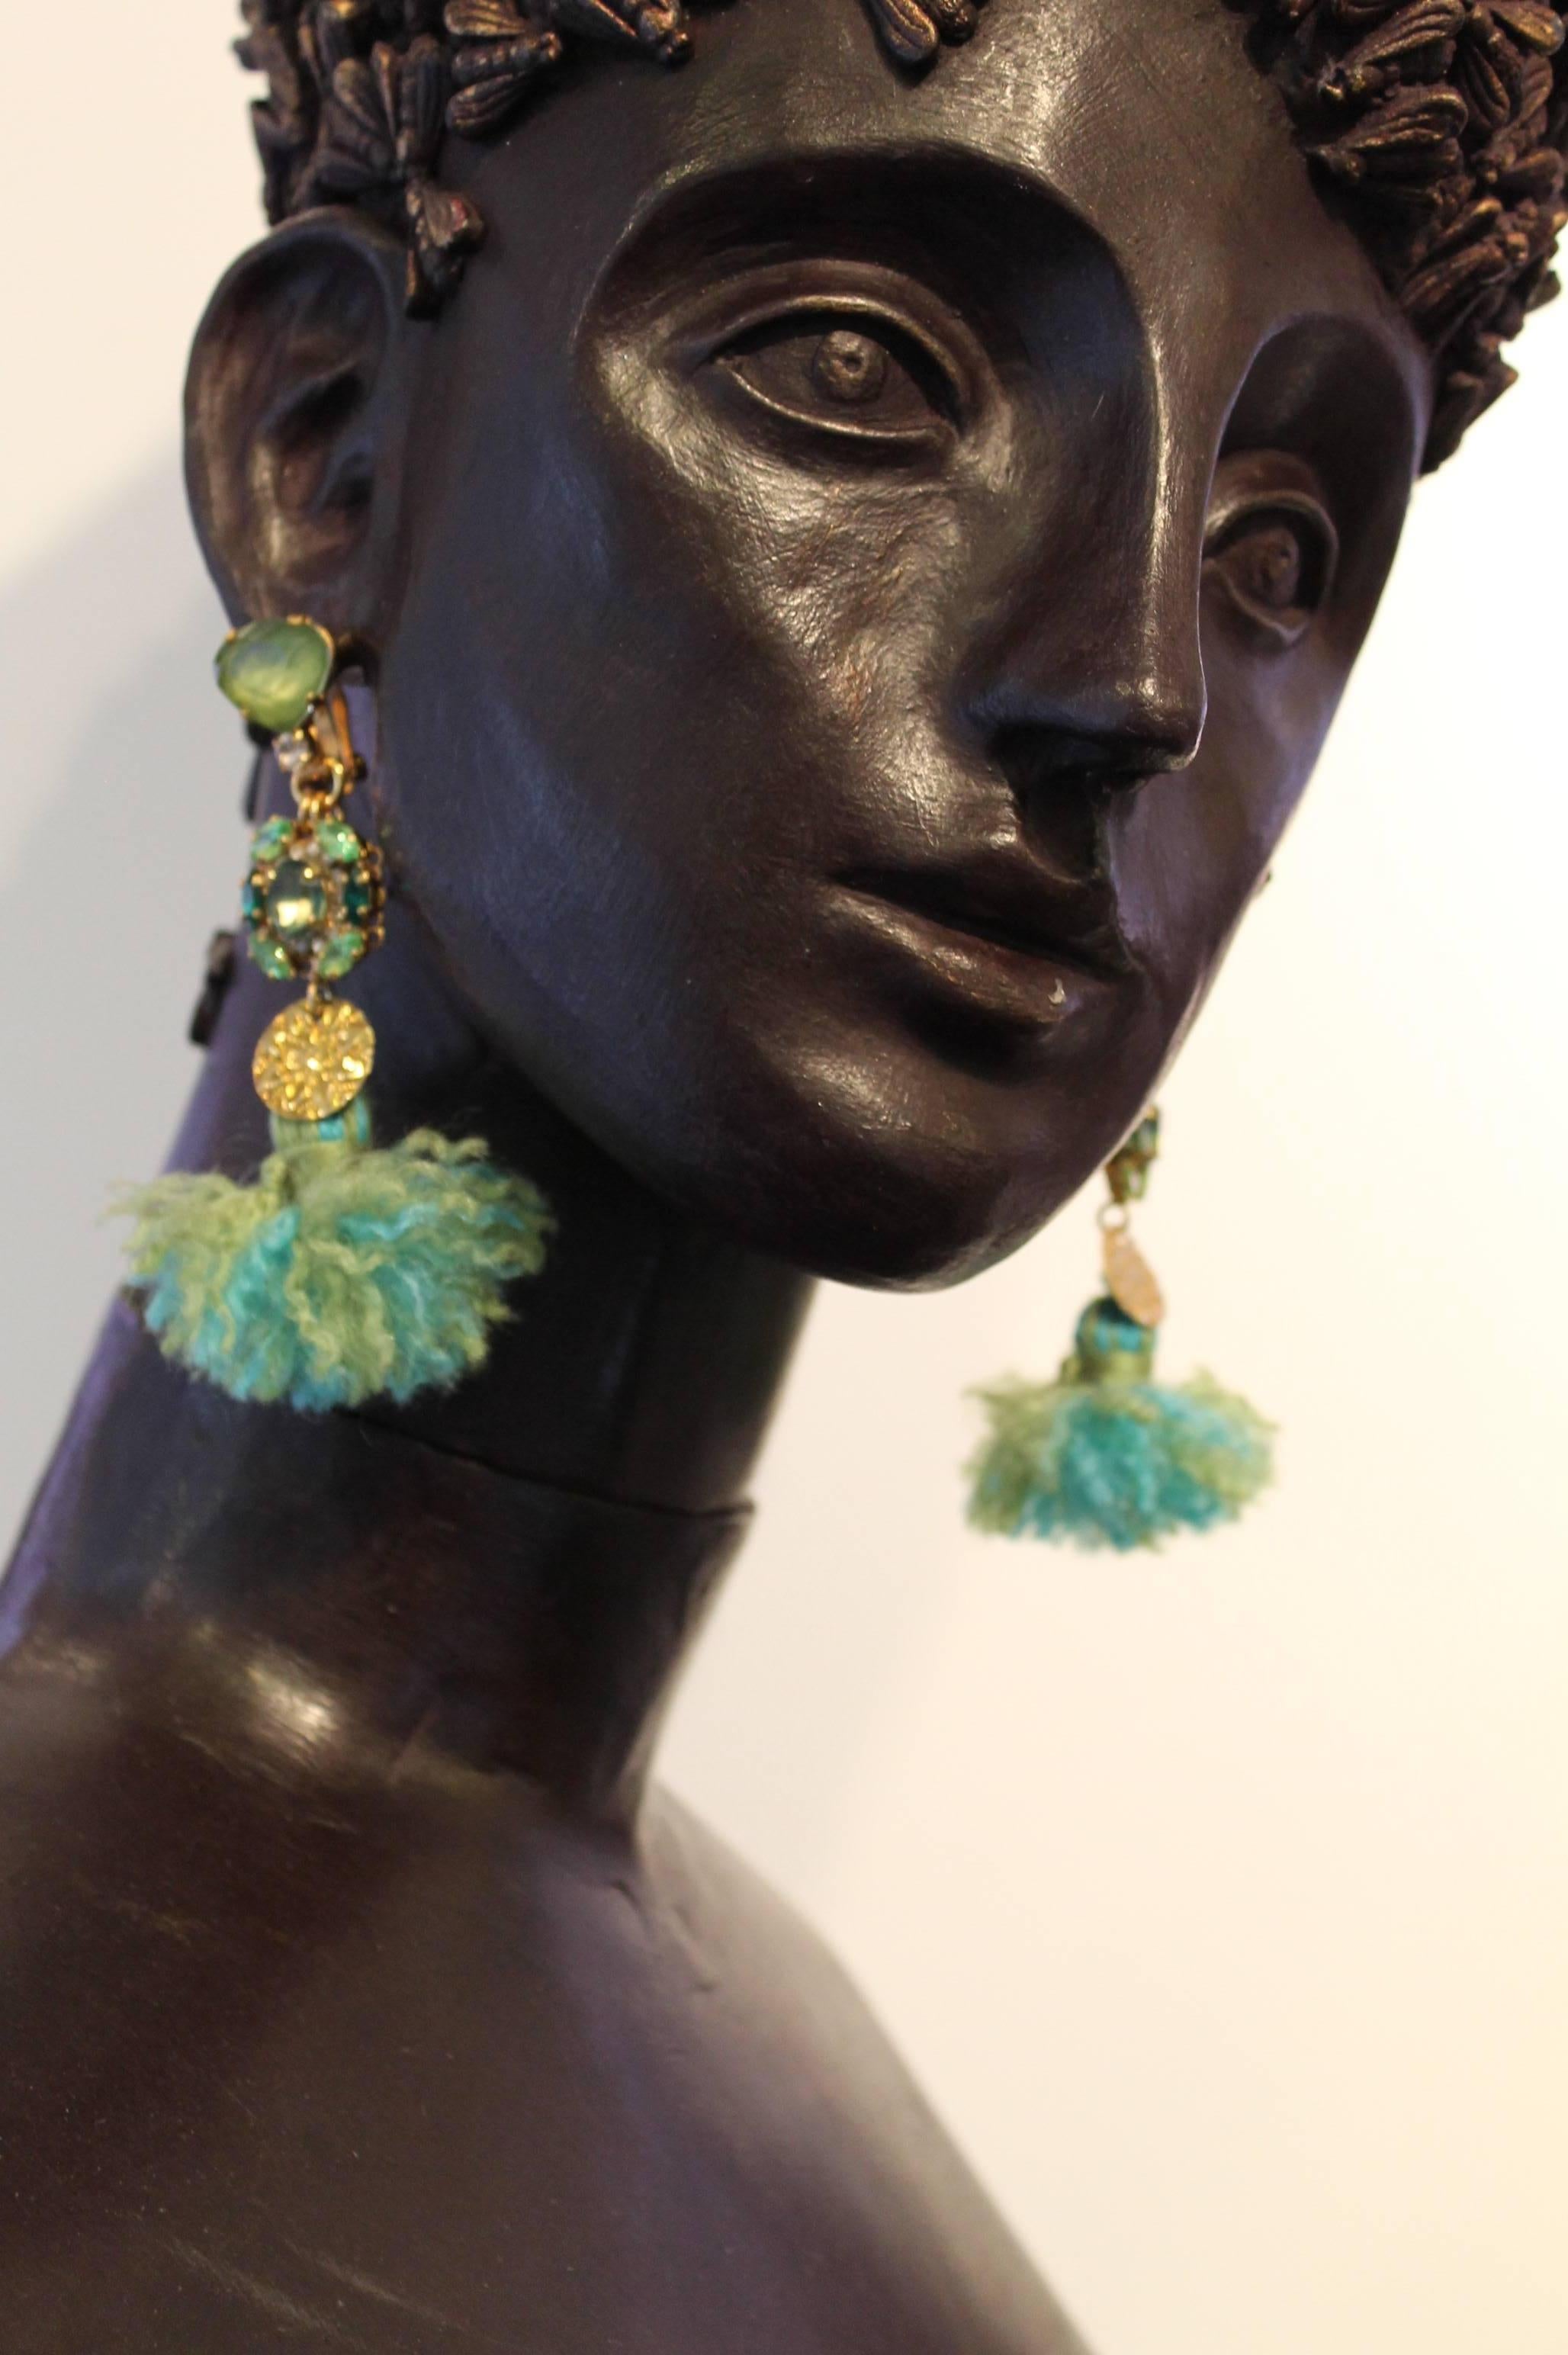 Fun and modern.

Hand-combed woollen tassels in gorgeous shades of green with  clear and green Swarovski crystals and gold-plated coins.

Fun, modern tassel statement drop earrings. Surprising light and easy to wear.

Please note these earrings are